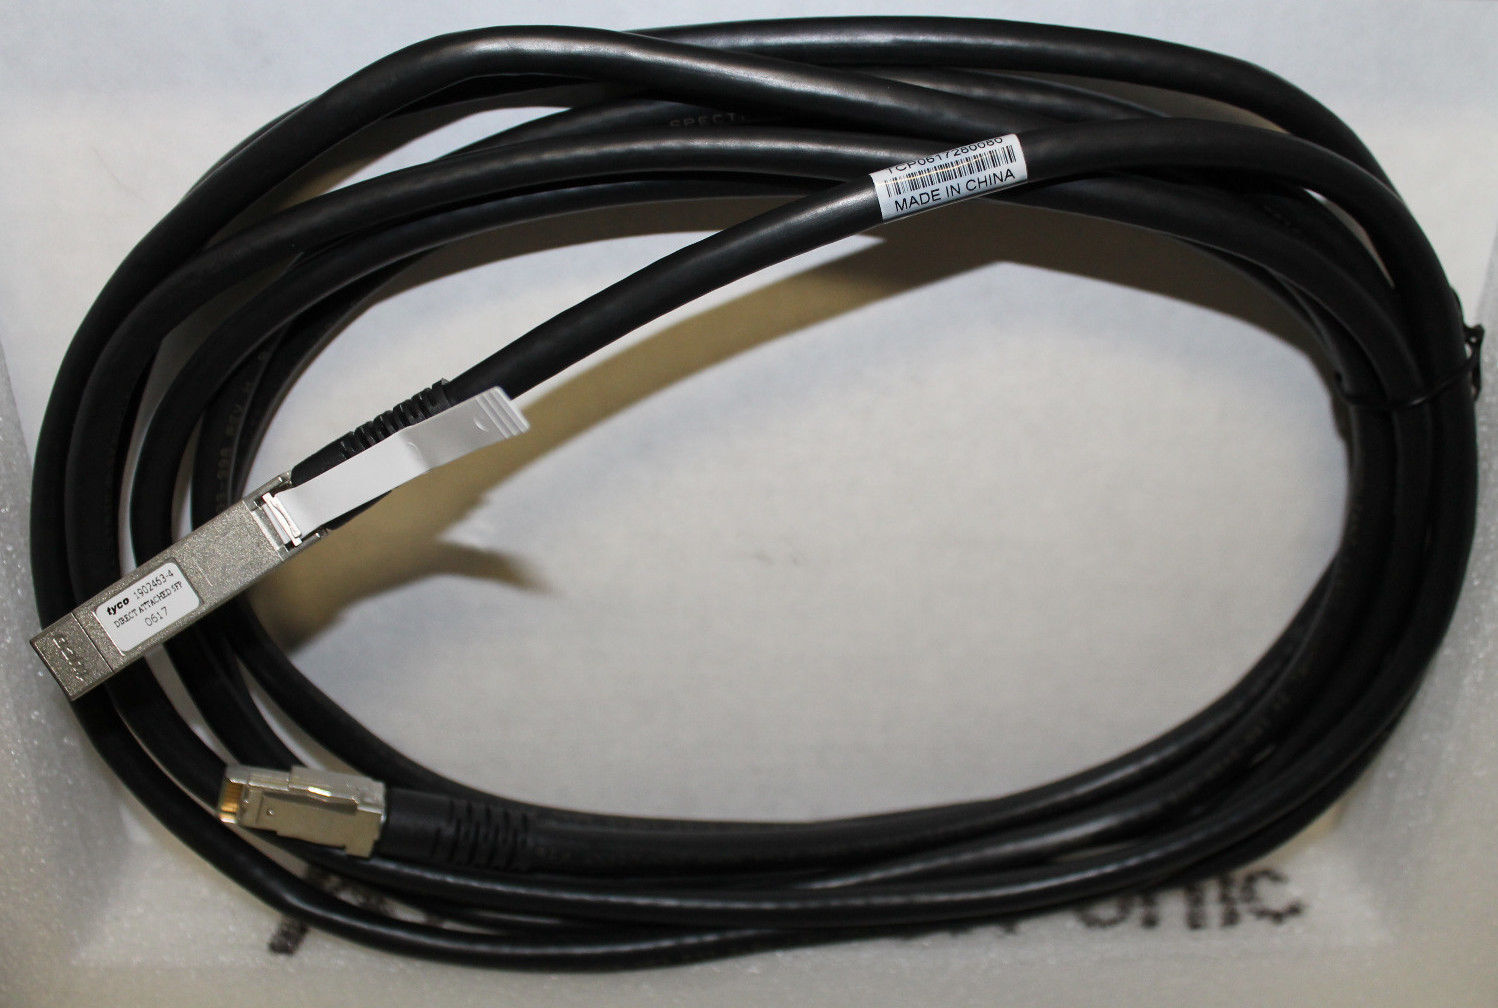 OEM Dell TYCO 1902463-4 DIRECT ATTACHED SFP (SFP to HSSDC2) 5M Cable 038-003-280